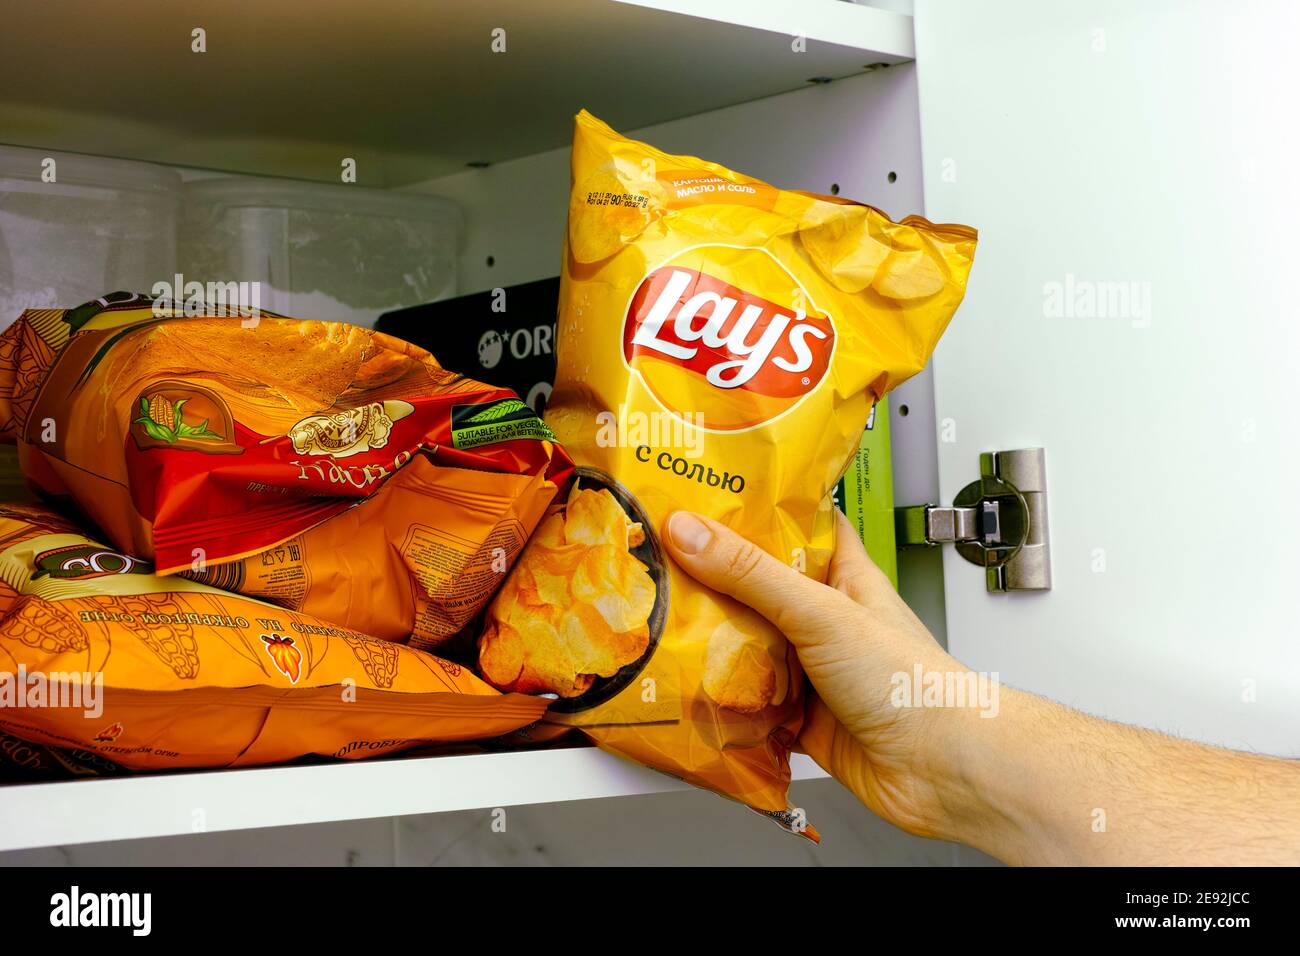 Lays Potato Chips Bag High Resolution Stock Photography And Images Alamy